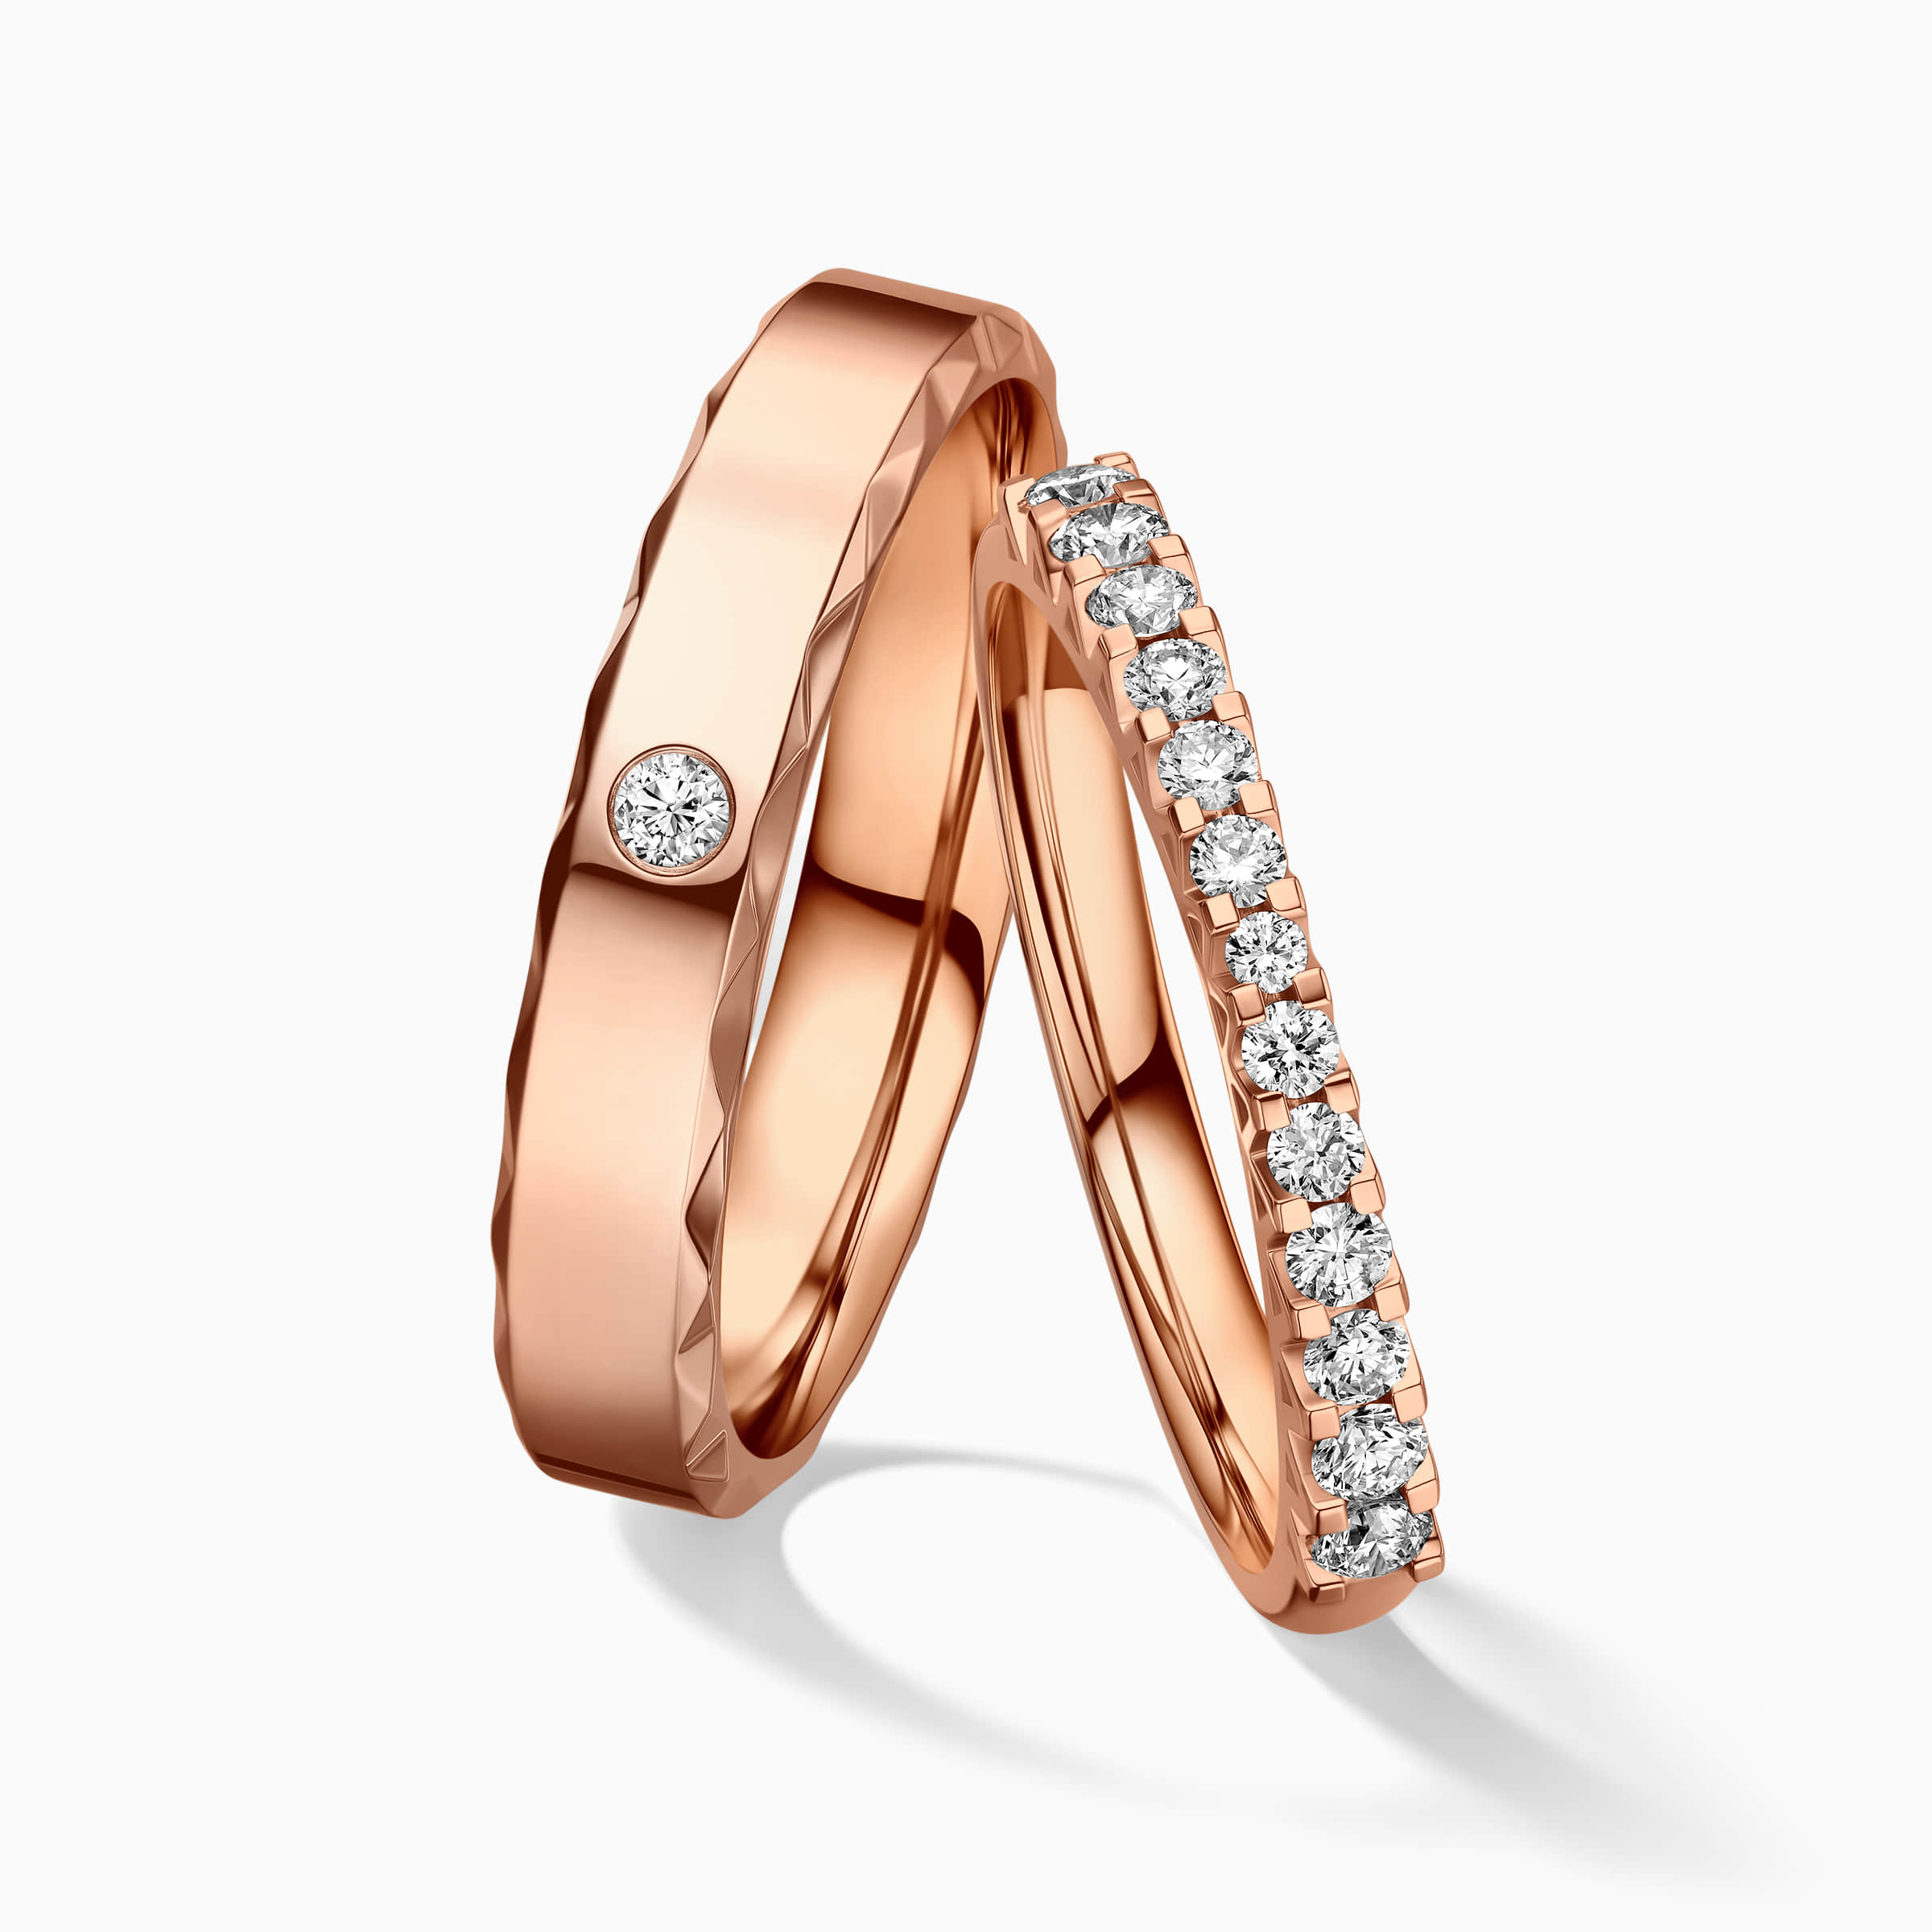 Darry Ring pavé diamond wedding band sets in rose gold